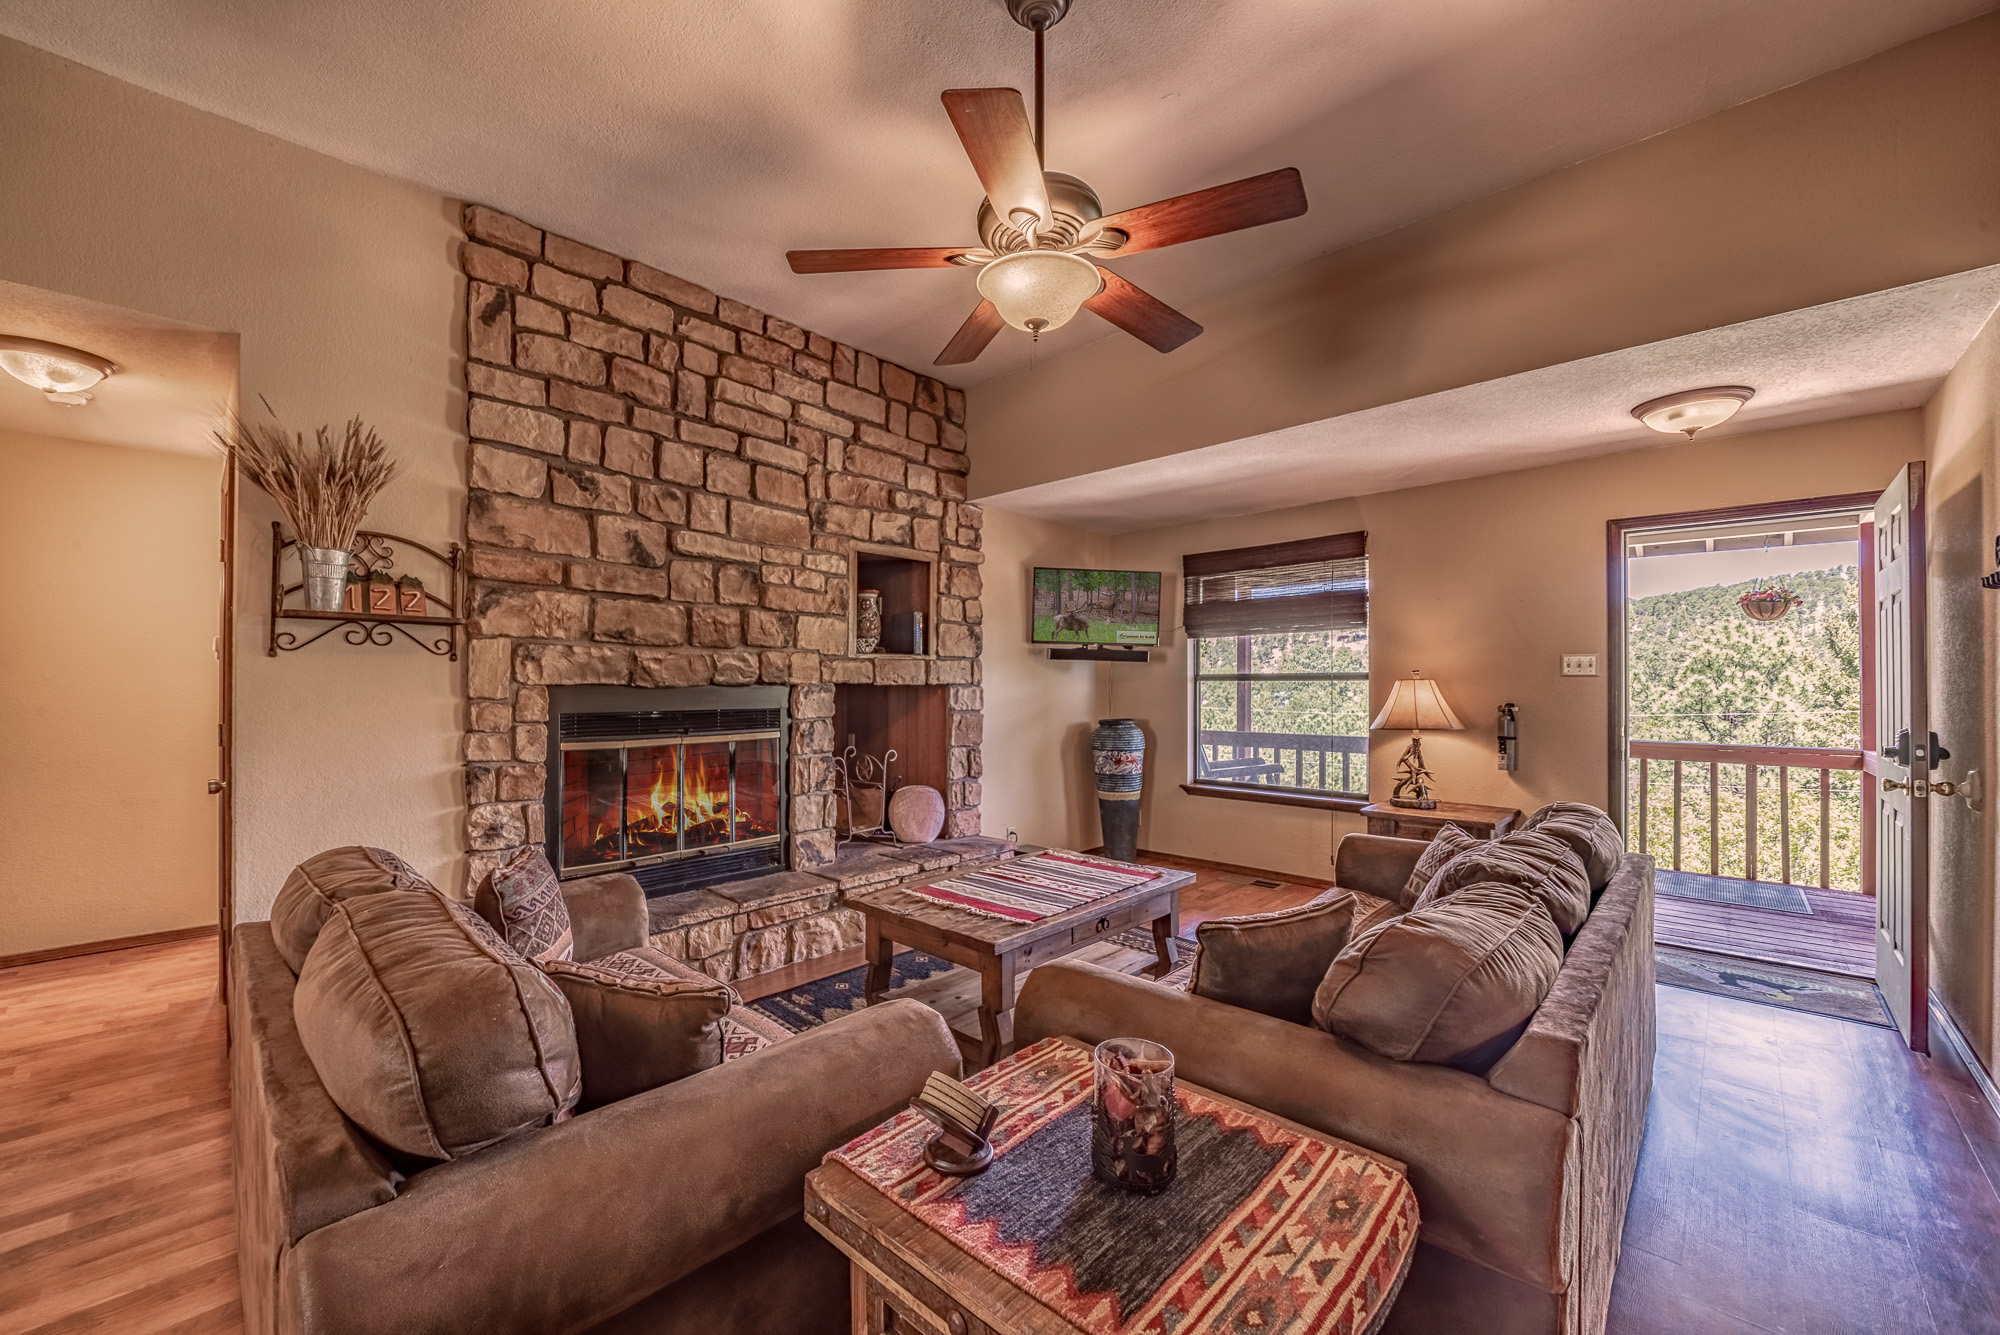 Deer Crossing: A Family Favorite with 3 Bedrooms and a Private Hot Tub!